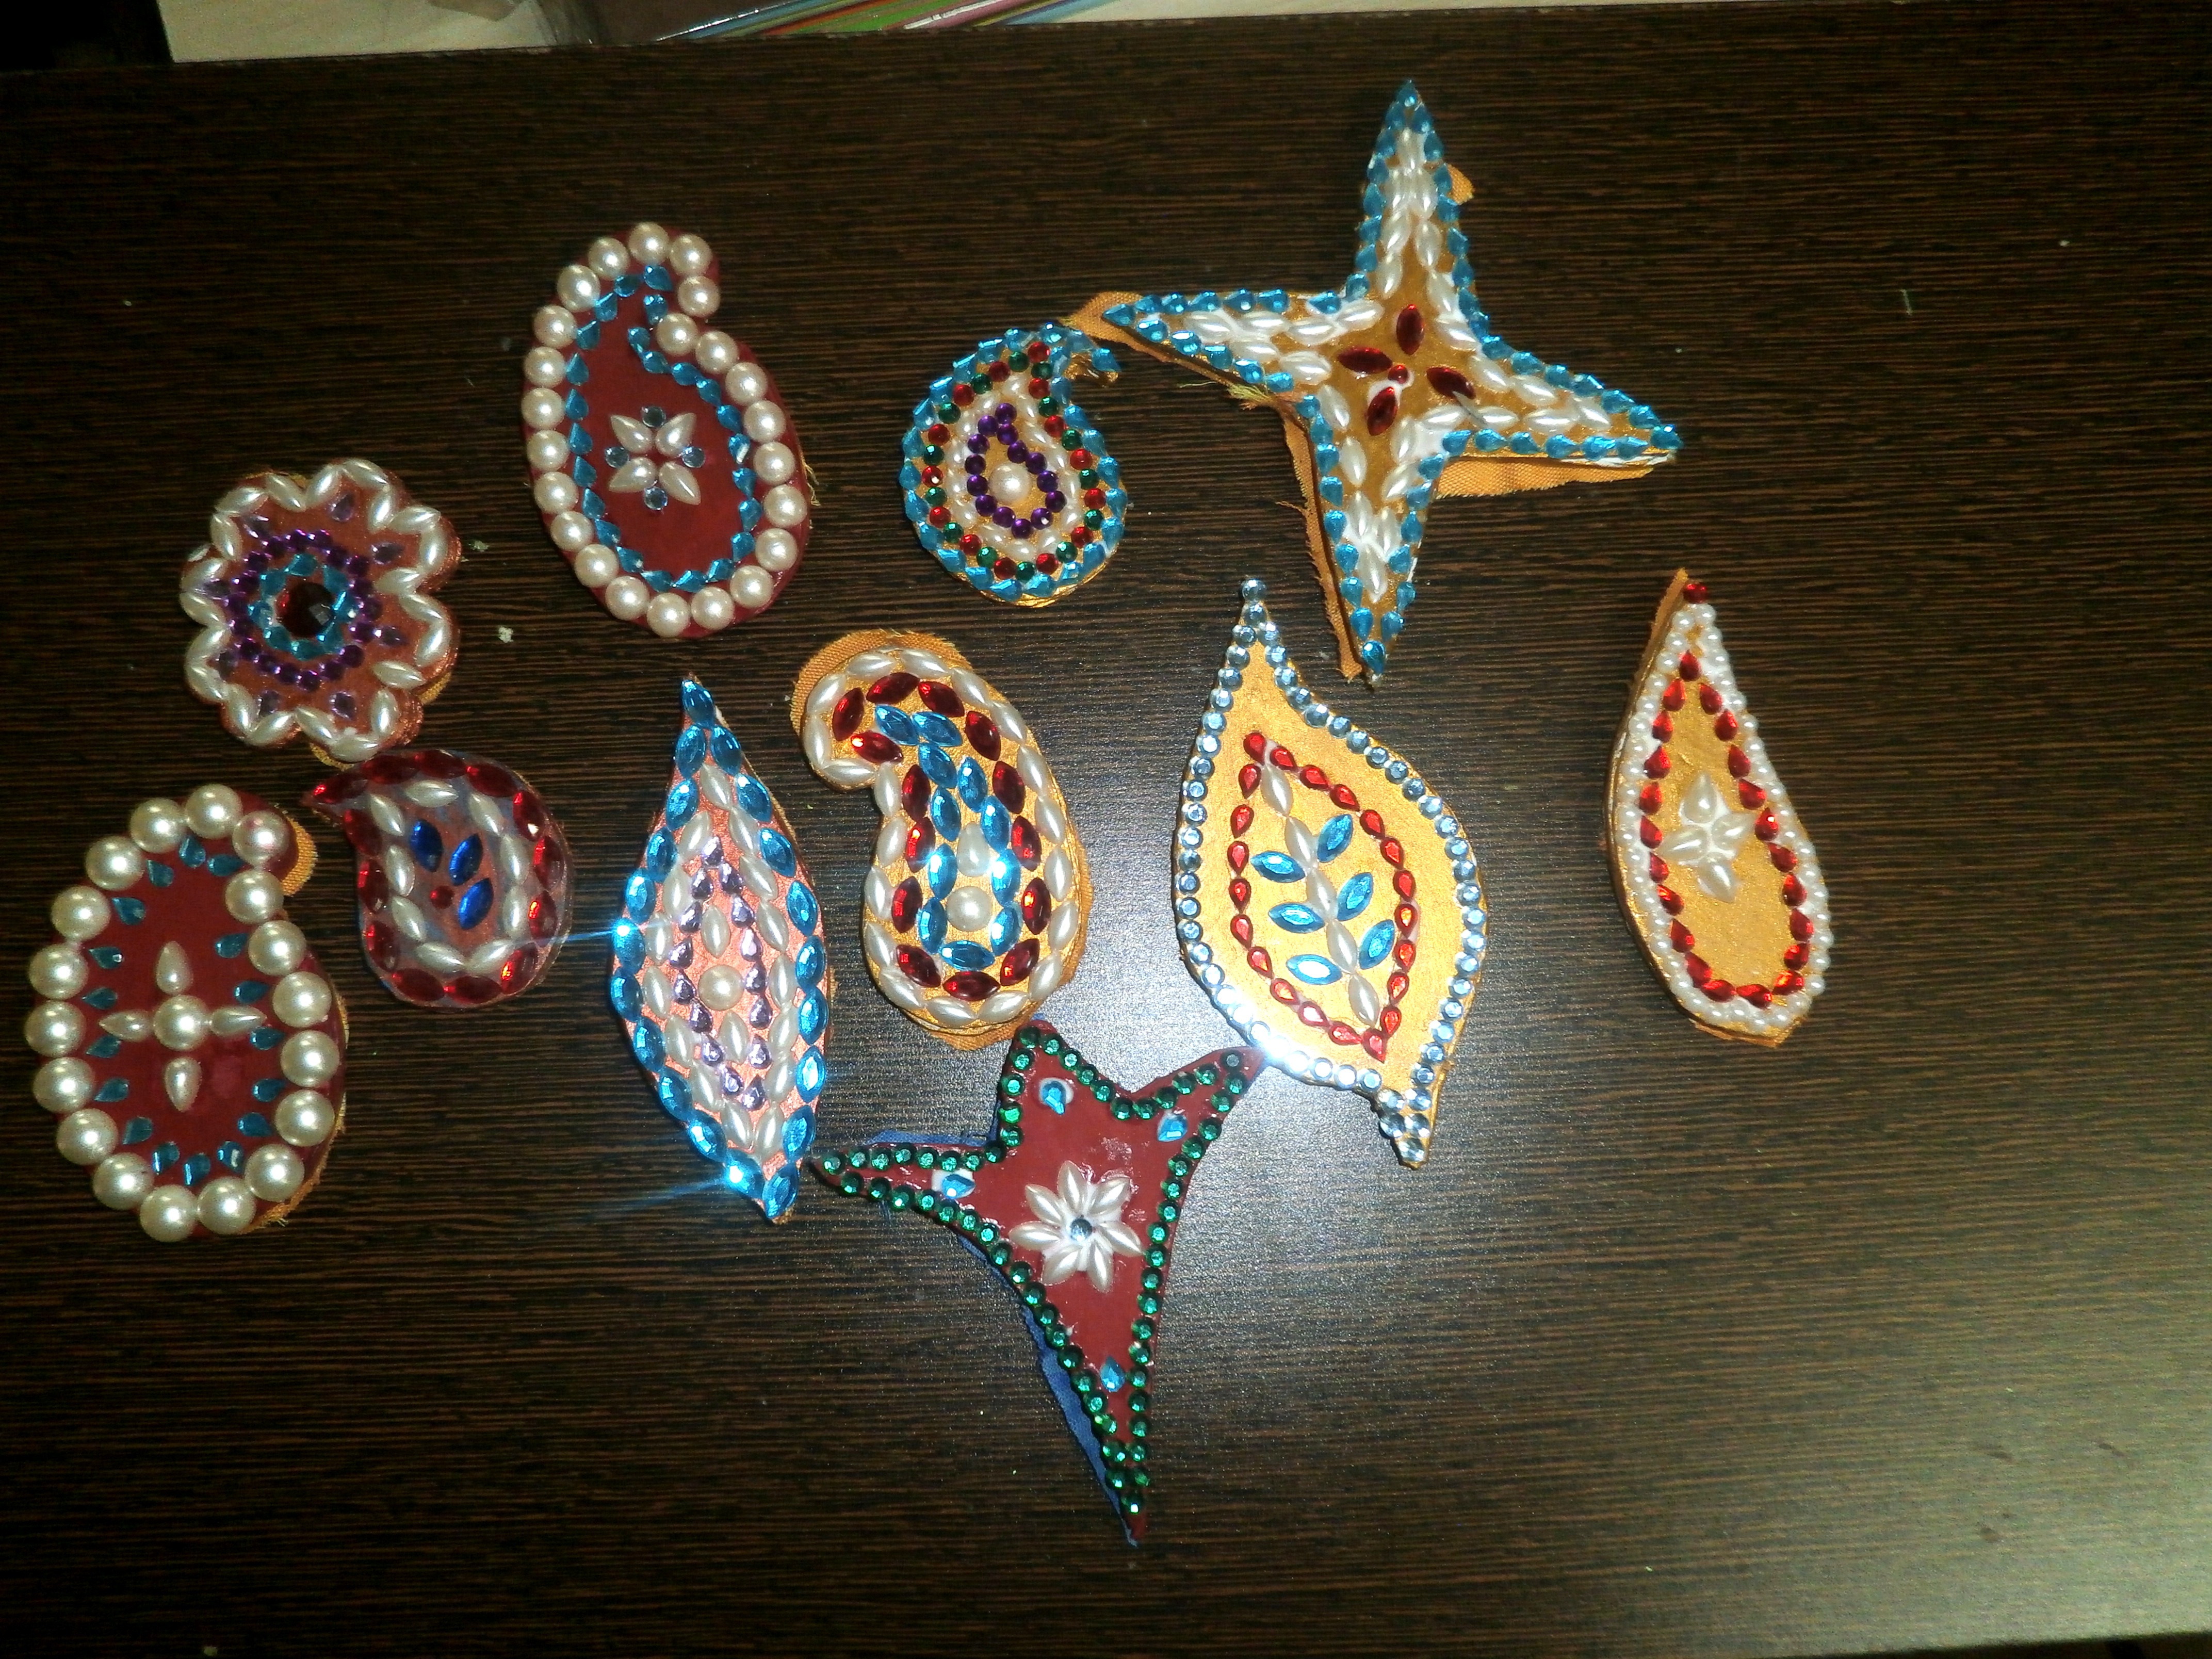 Pretty brooches made by the women
